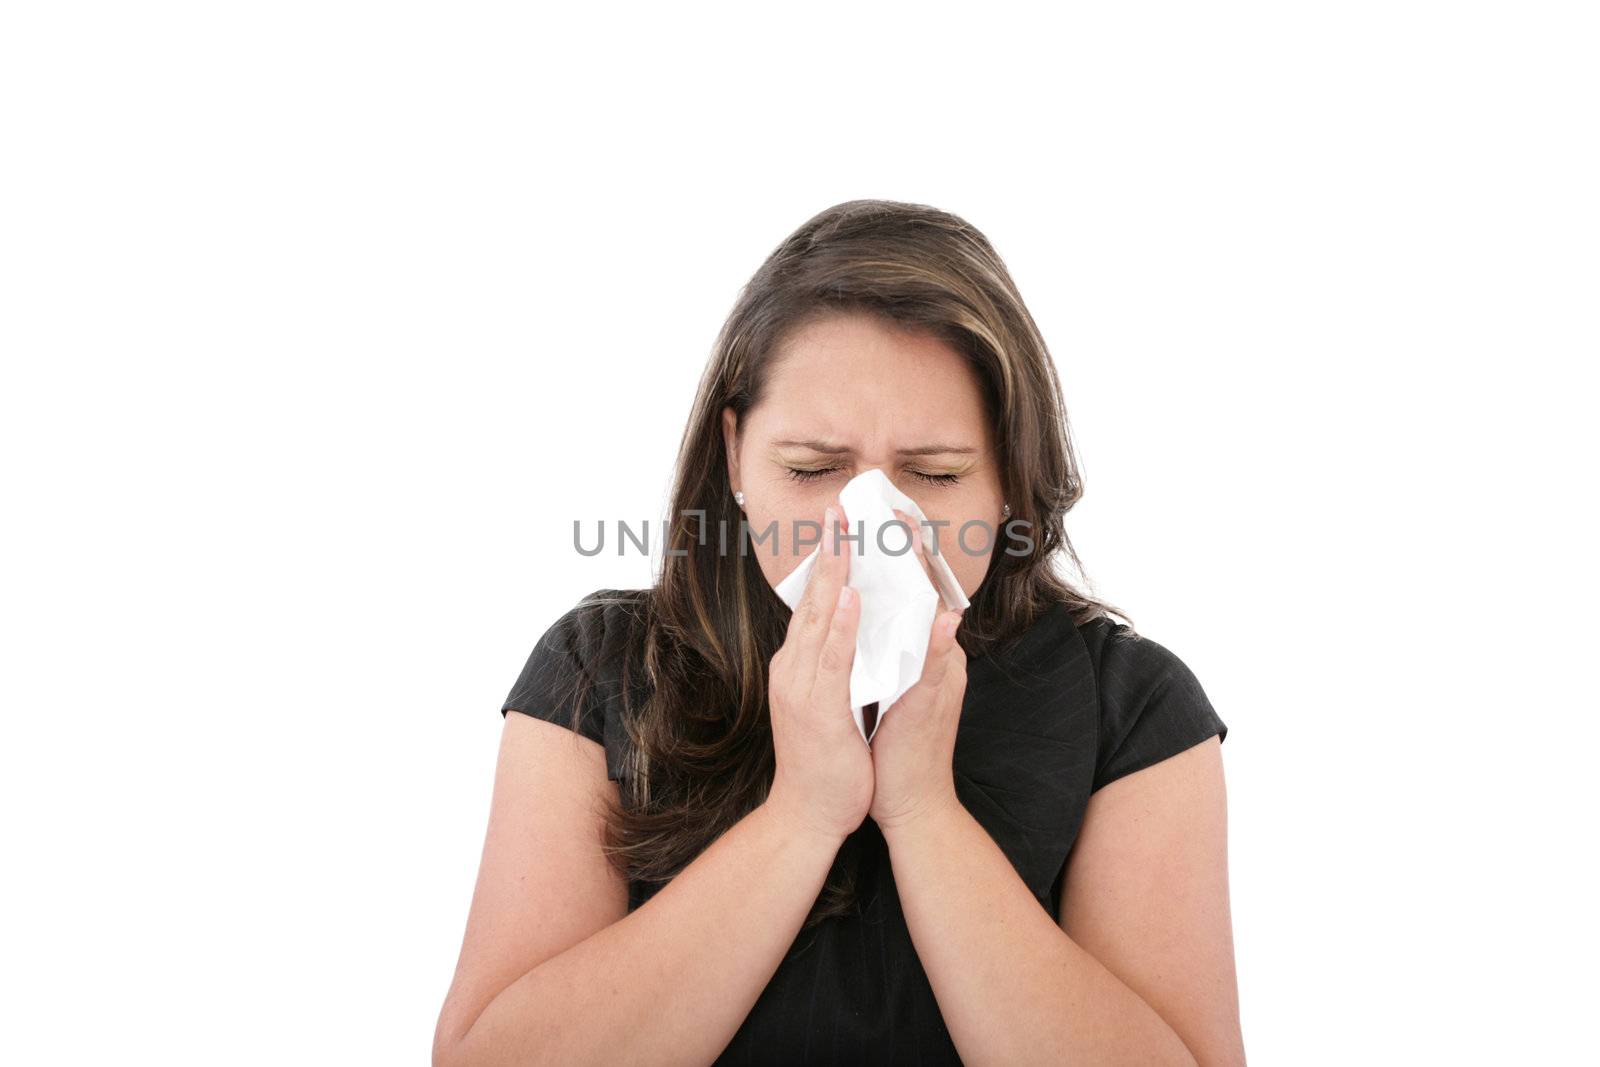 A woman with a cold or allergy wiping or blowing her nose.